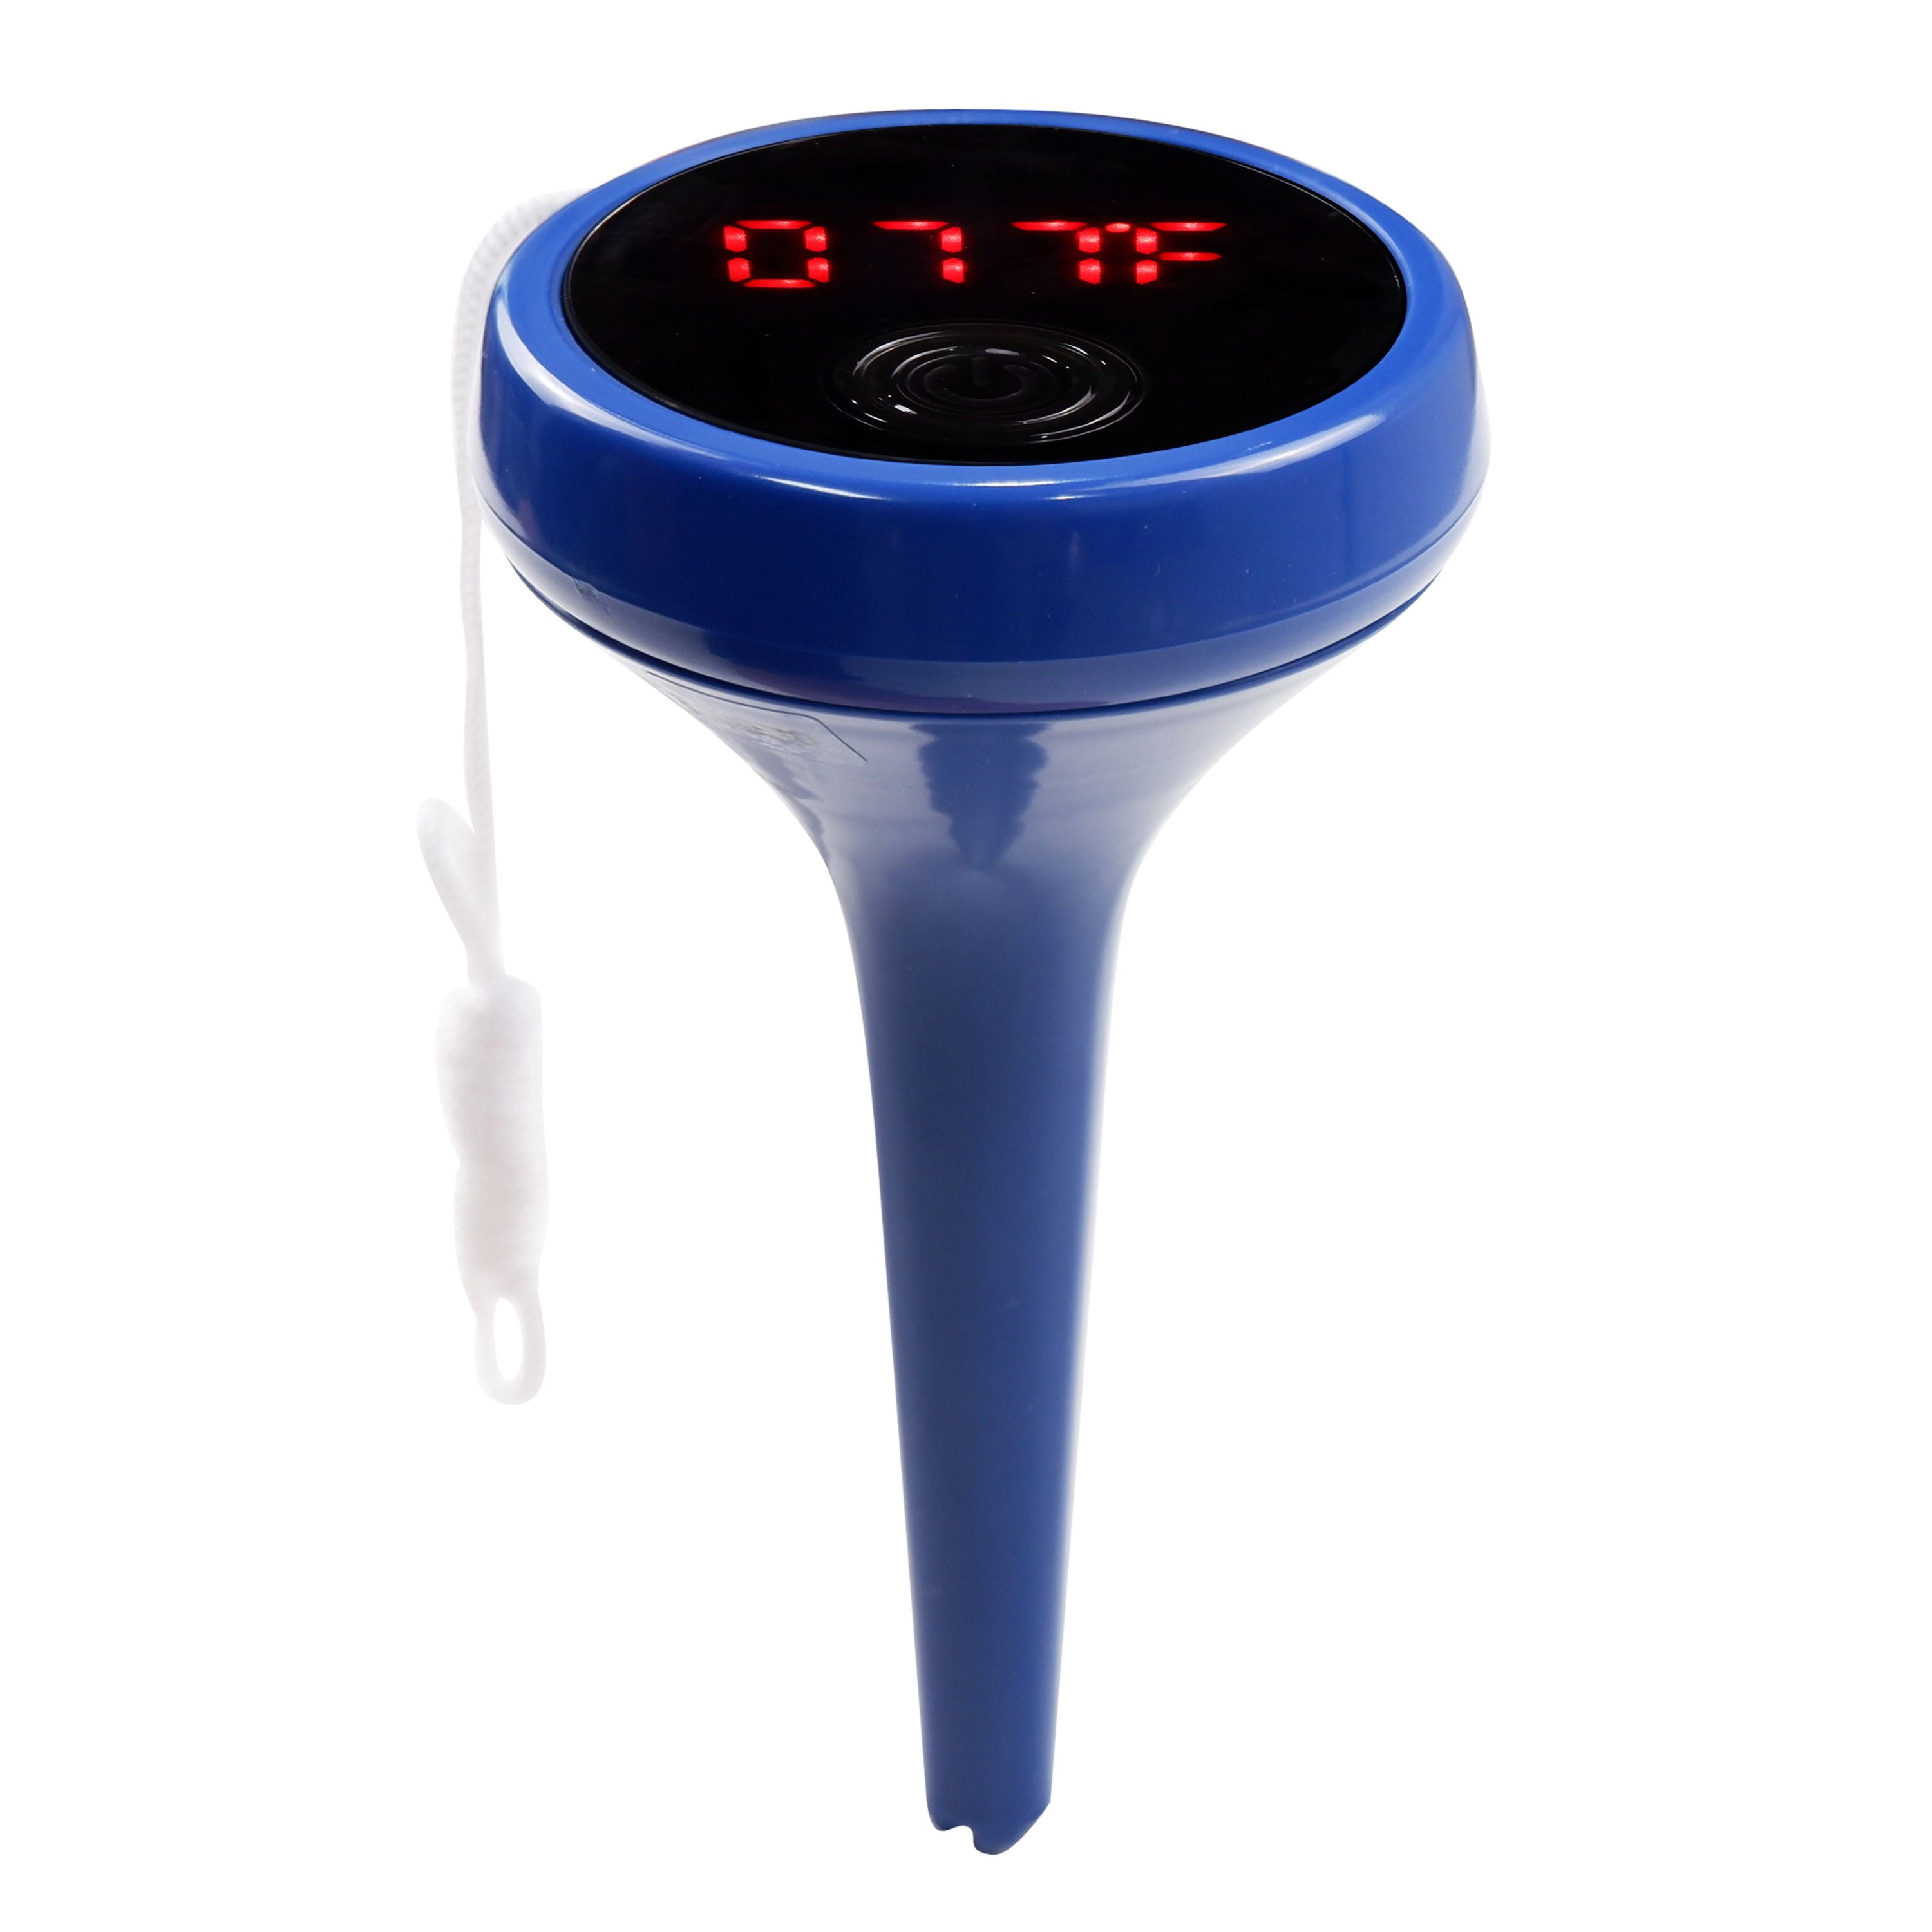 Mainstays Blue Pool Floating Swimming Digital Thermometer with LCD Display, Size: Large:3xW:3.4xH:5.9in